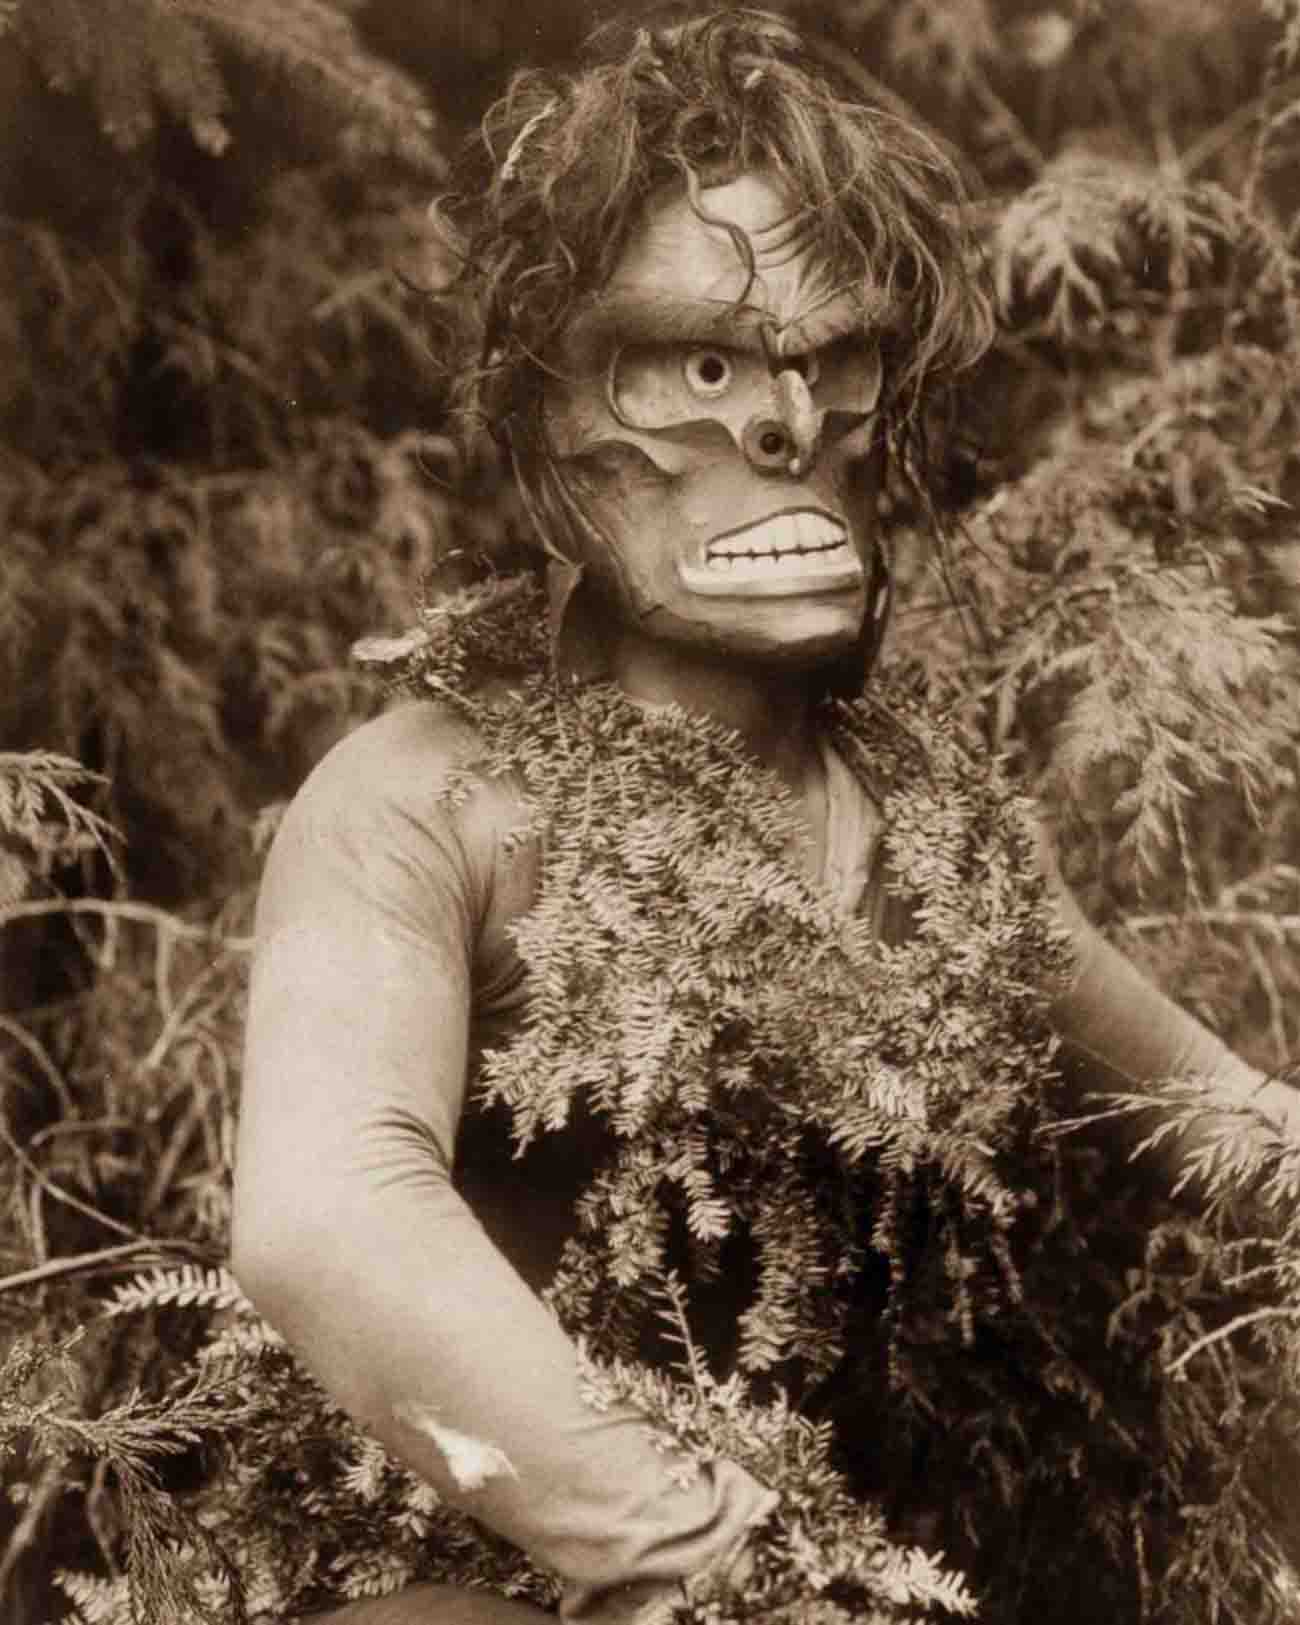 Dancer representing Paqusilahl (“man of the ground embodiment”), wearing a mask and shirt covered with hemlock boughs, representing paqus, a wild man of the woods.